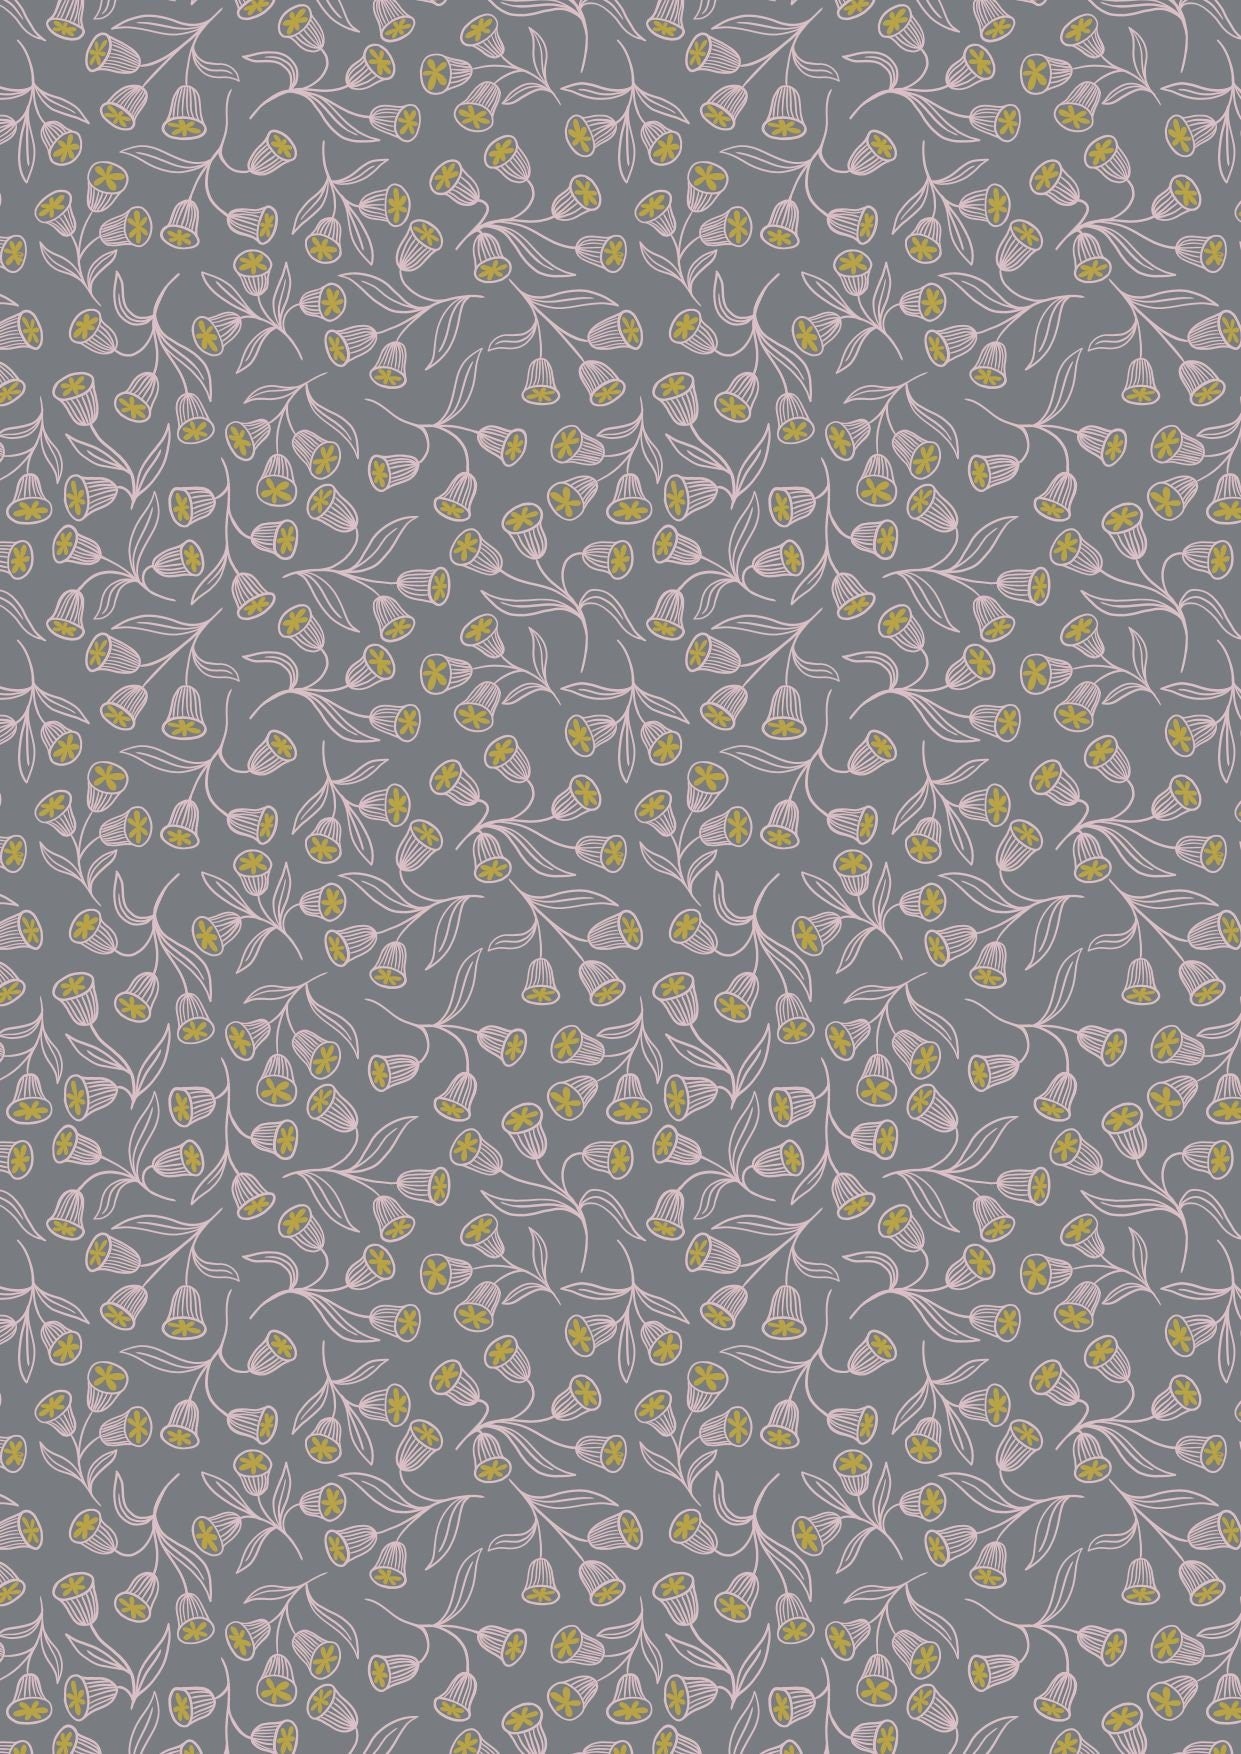 Pink flowers on grey with gold metallic elements -Enchanted by Lewis and Irene,